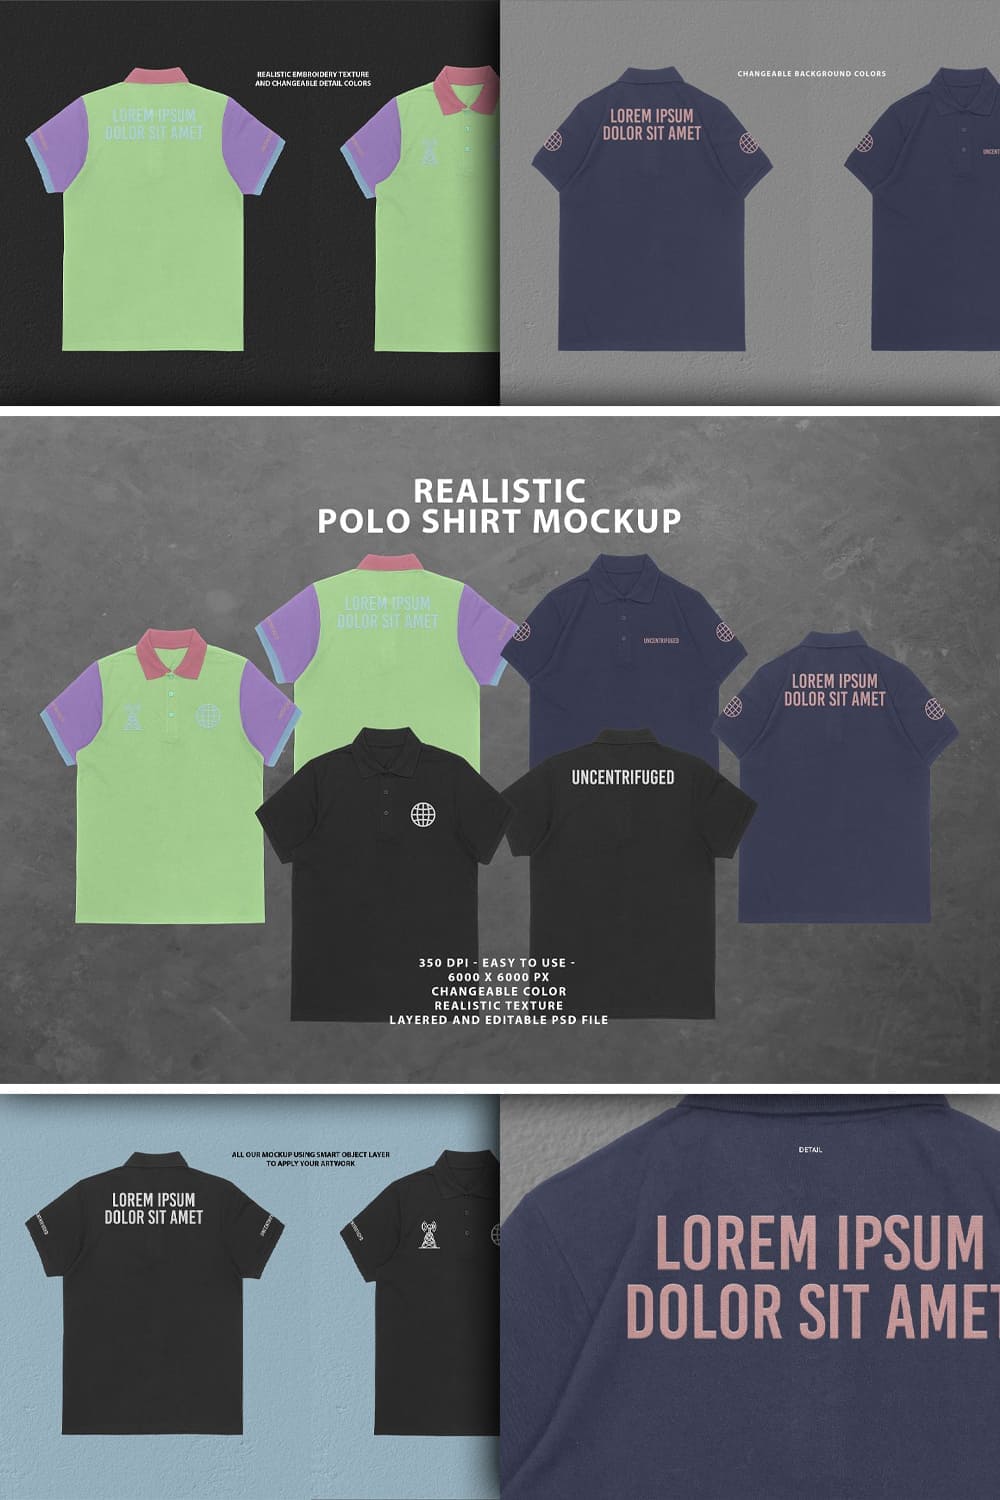 Realistic polo shirt with changeable color.